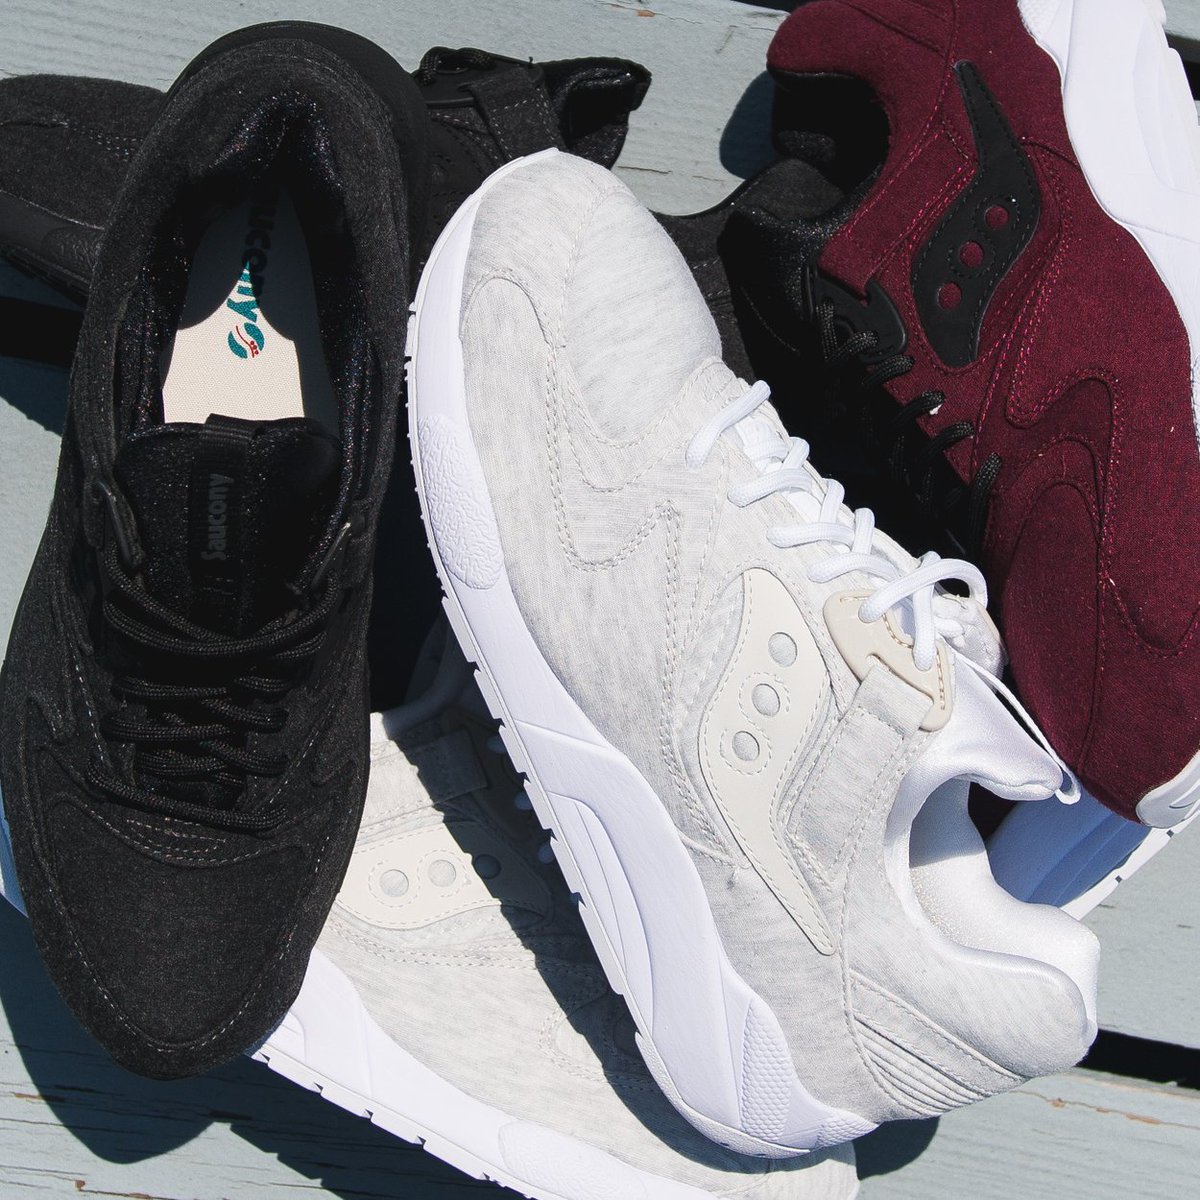 saucony grid 9000 jersey pack